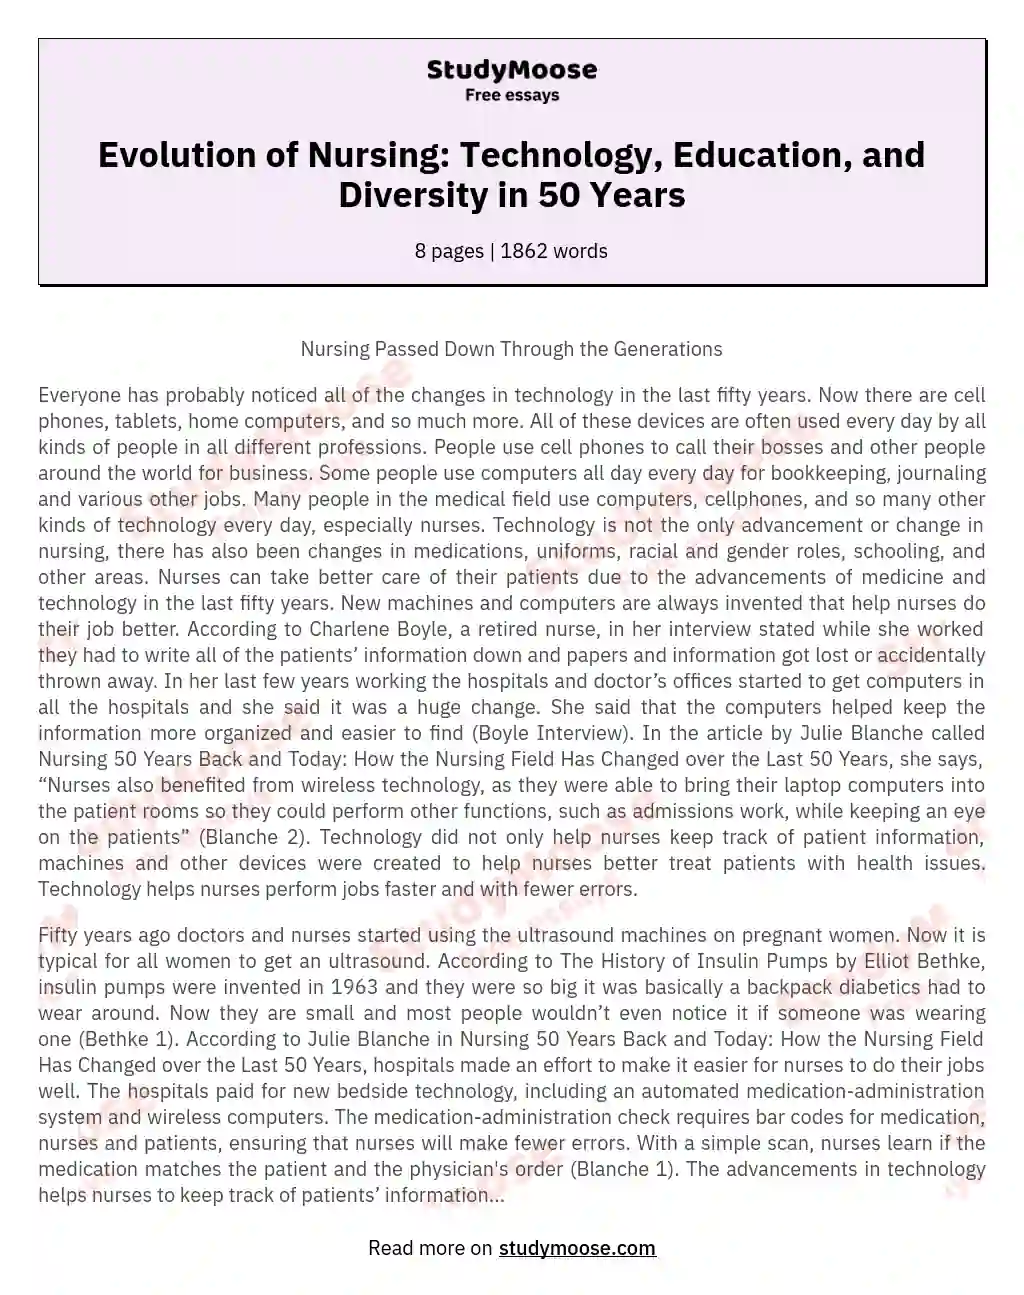 Evolution of Nursing: Technology, Education, and Diversity in 50 Years essay